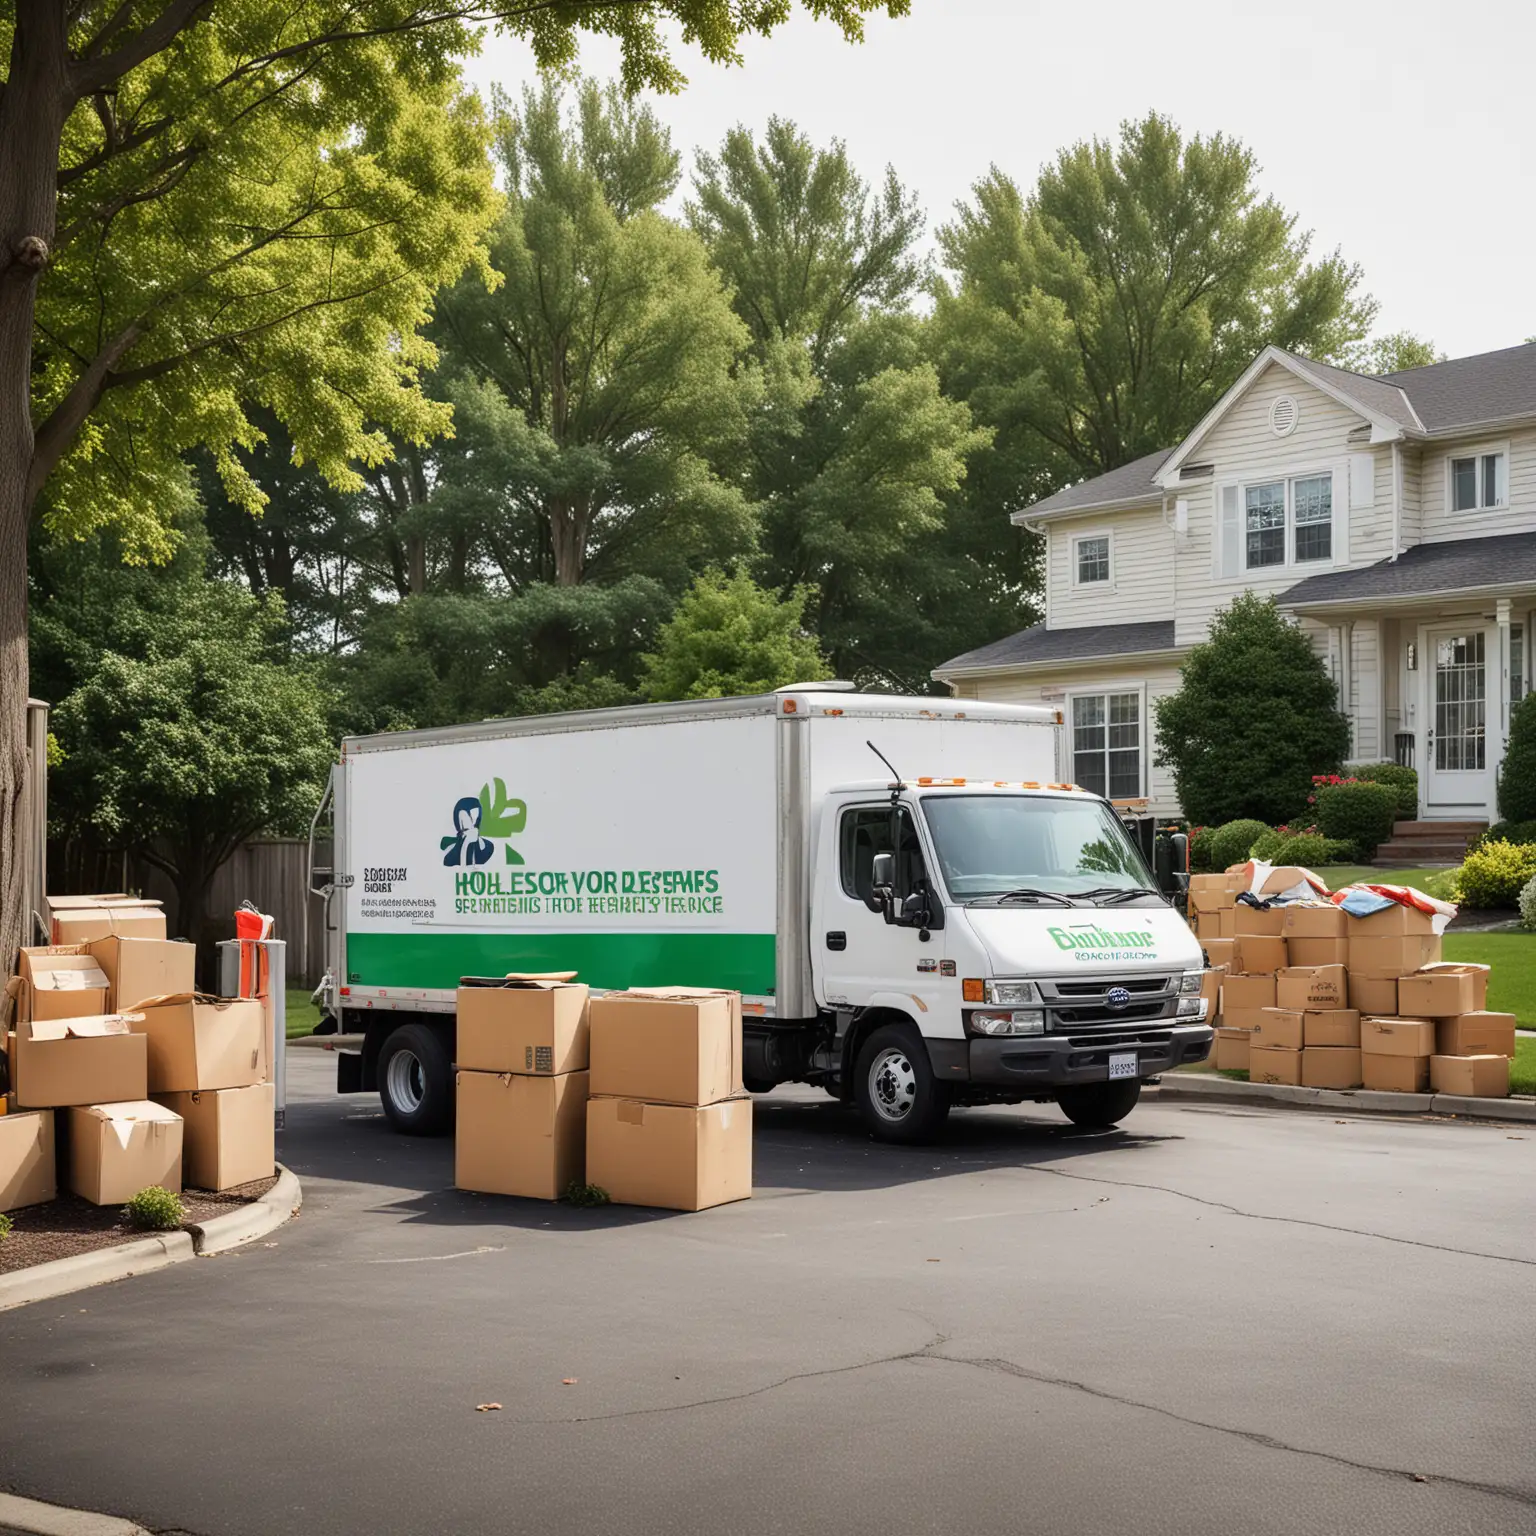 Create a high-quality photograph depicting a residential junk removal scene. The image should feature a team of two professionals in branded uniforms actively removing a variety of household items such as outdated furniture, appliances, and boxes from a suburban home. The setting is focused on the driveway of a typical American home with an open garage showing more items ready for removal. Emphasize the professionalism and efficiency of the service with a clear, sunny day enhancing the vibrant and active atmosphere. Ensure the junk removal truck is visible with the company logo clearly displayed. Use a DSLR camera perspective with a 24mm lens to capture a wide yet detailed view of the entire scene.